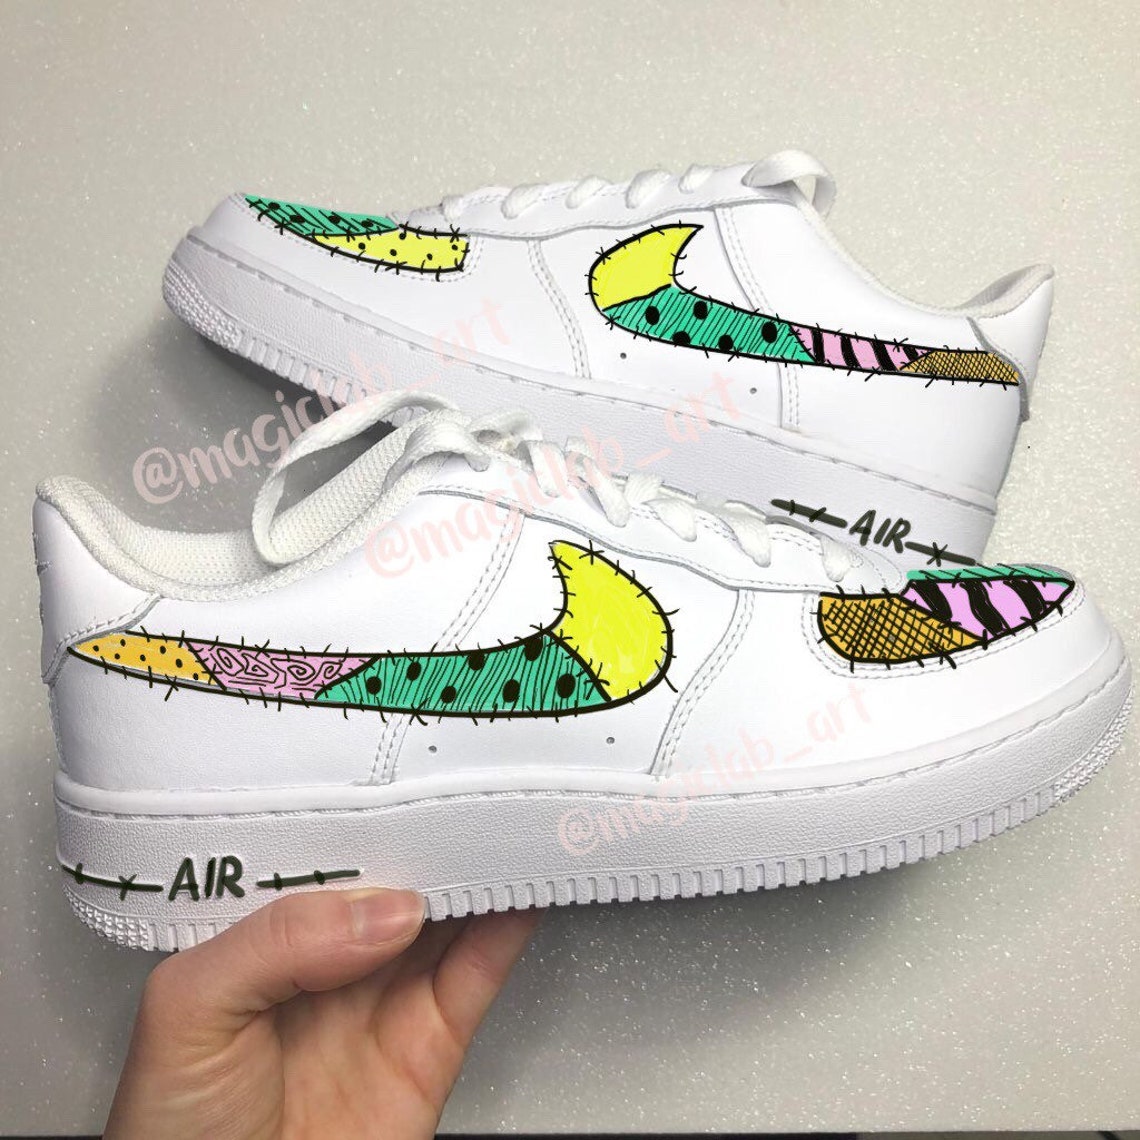 Nike Air Force 1 Custom snoopy Hand Painted | Etsy